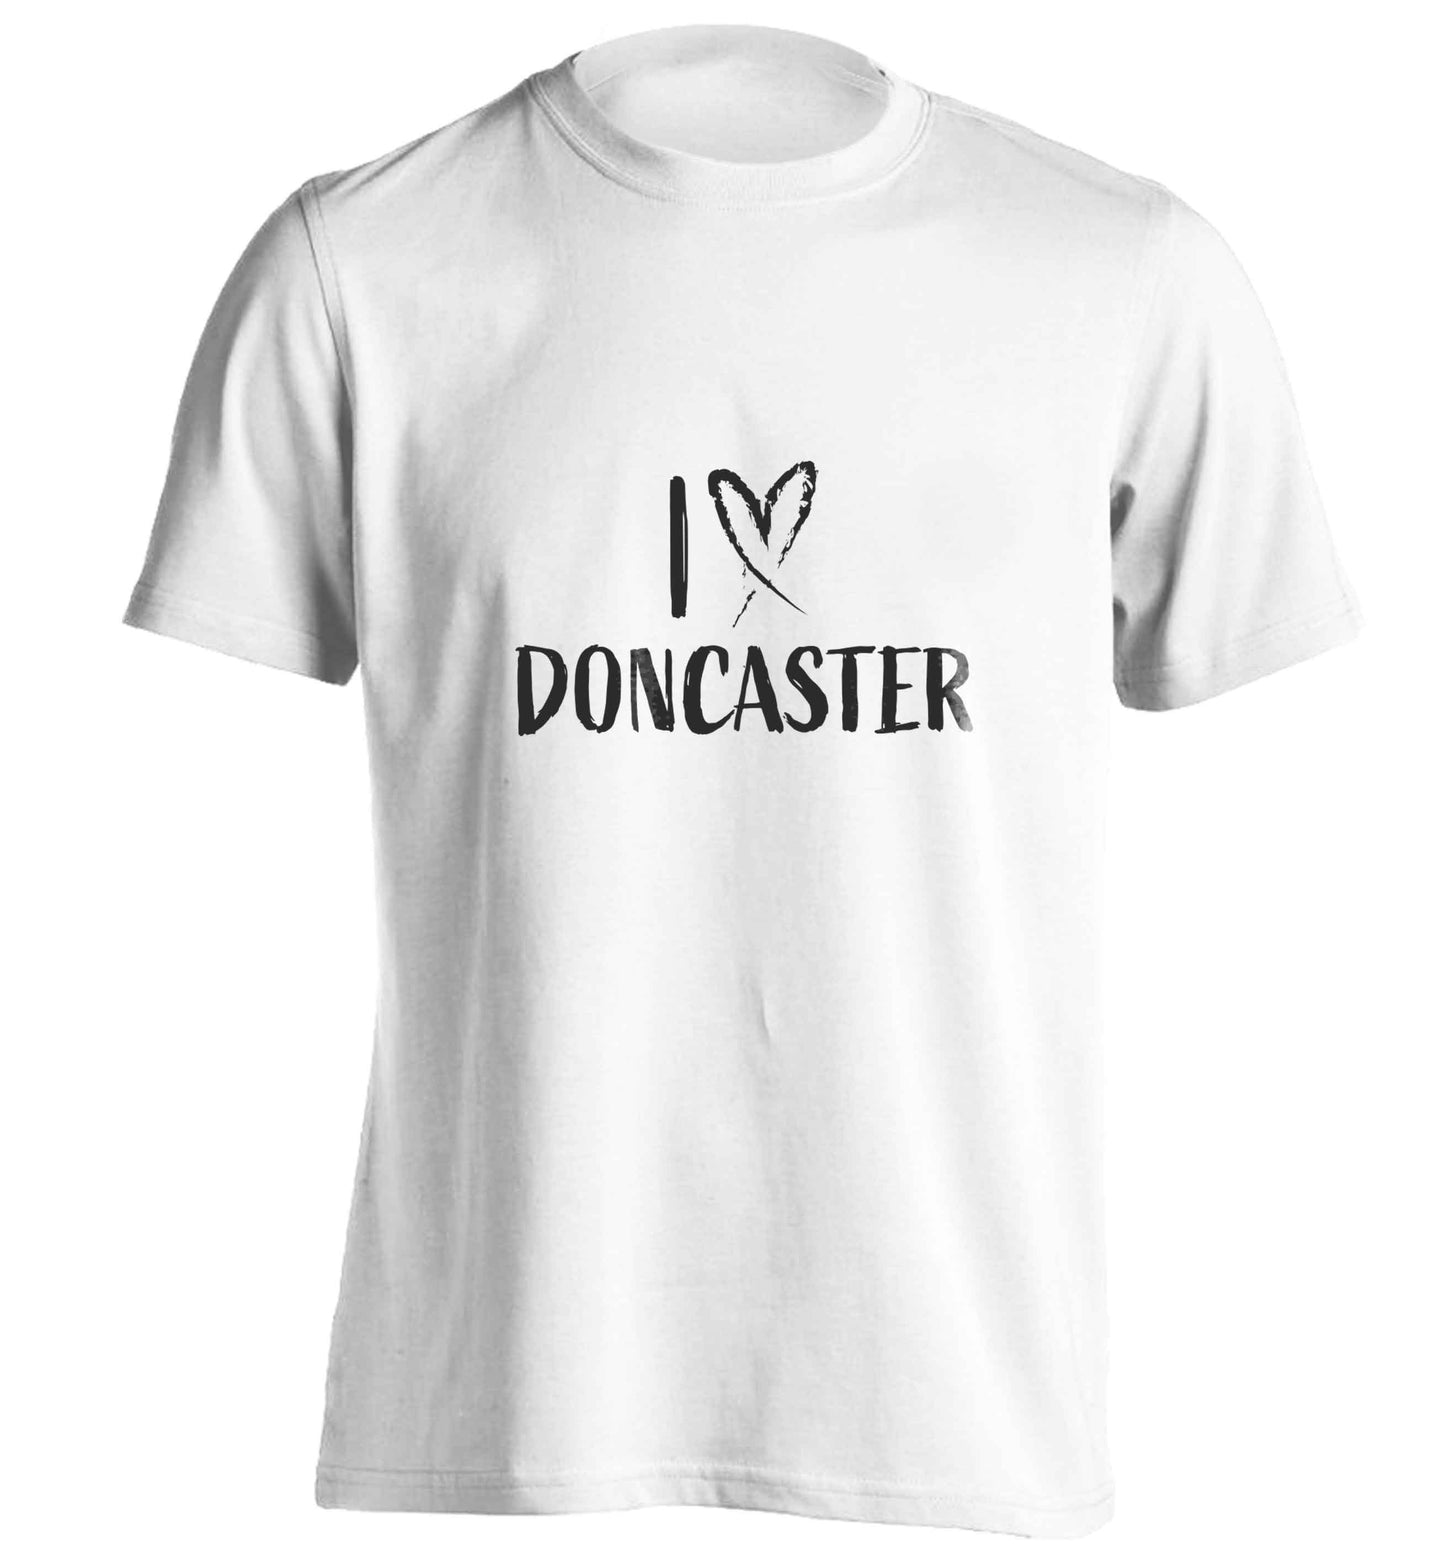 I love Doncaster adults unisex white Tshirt 2XL